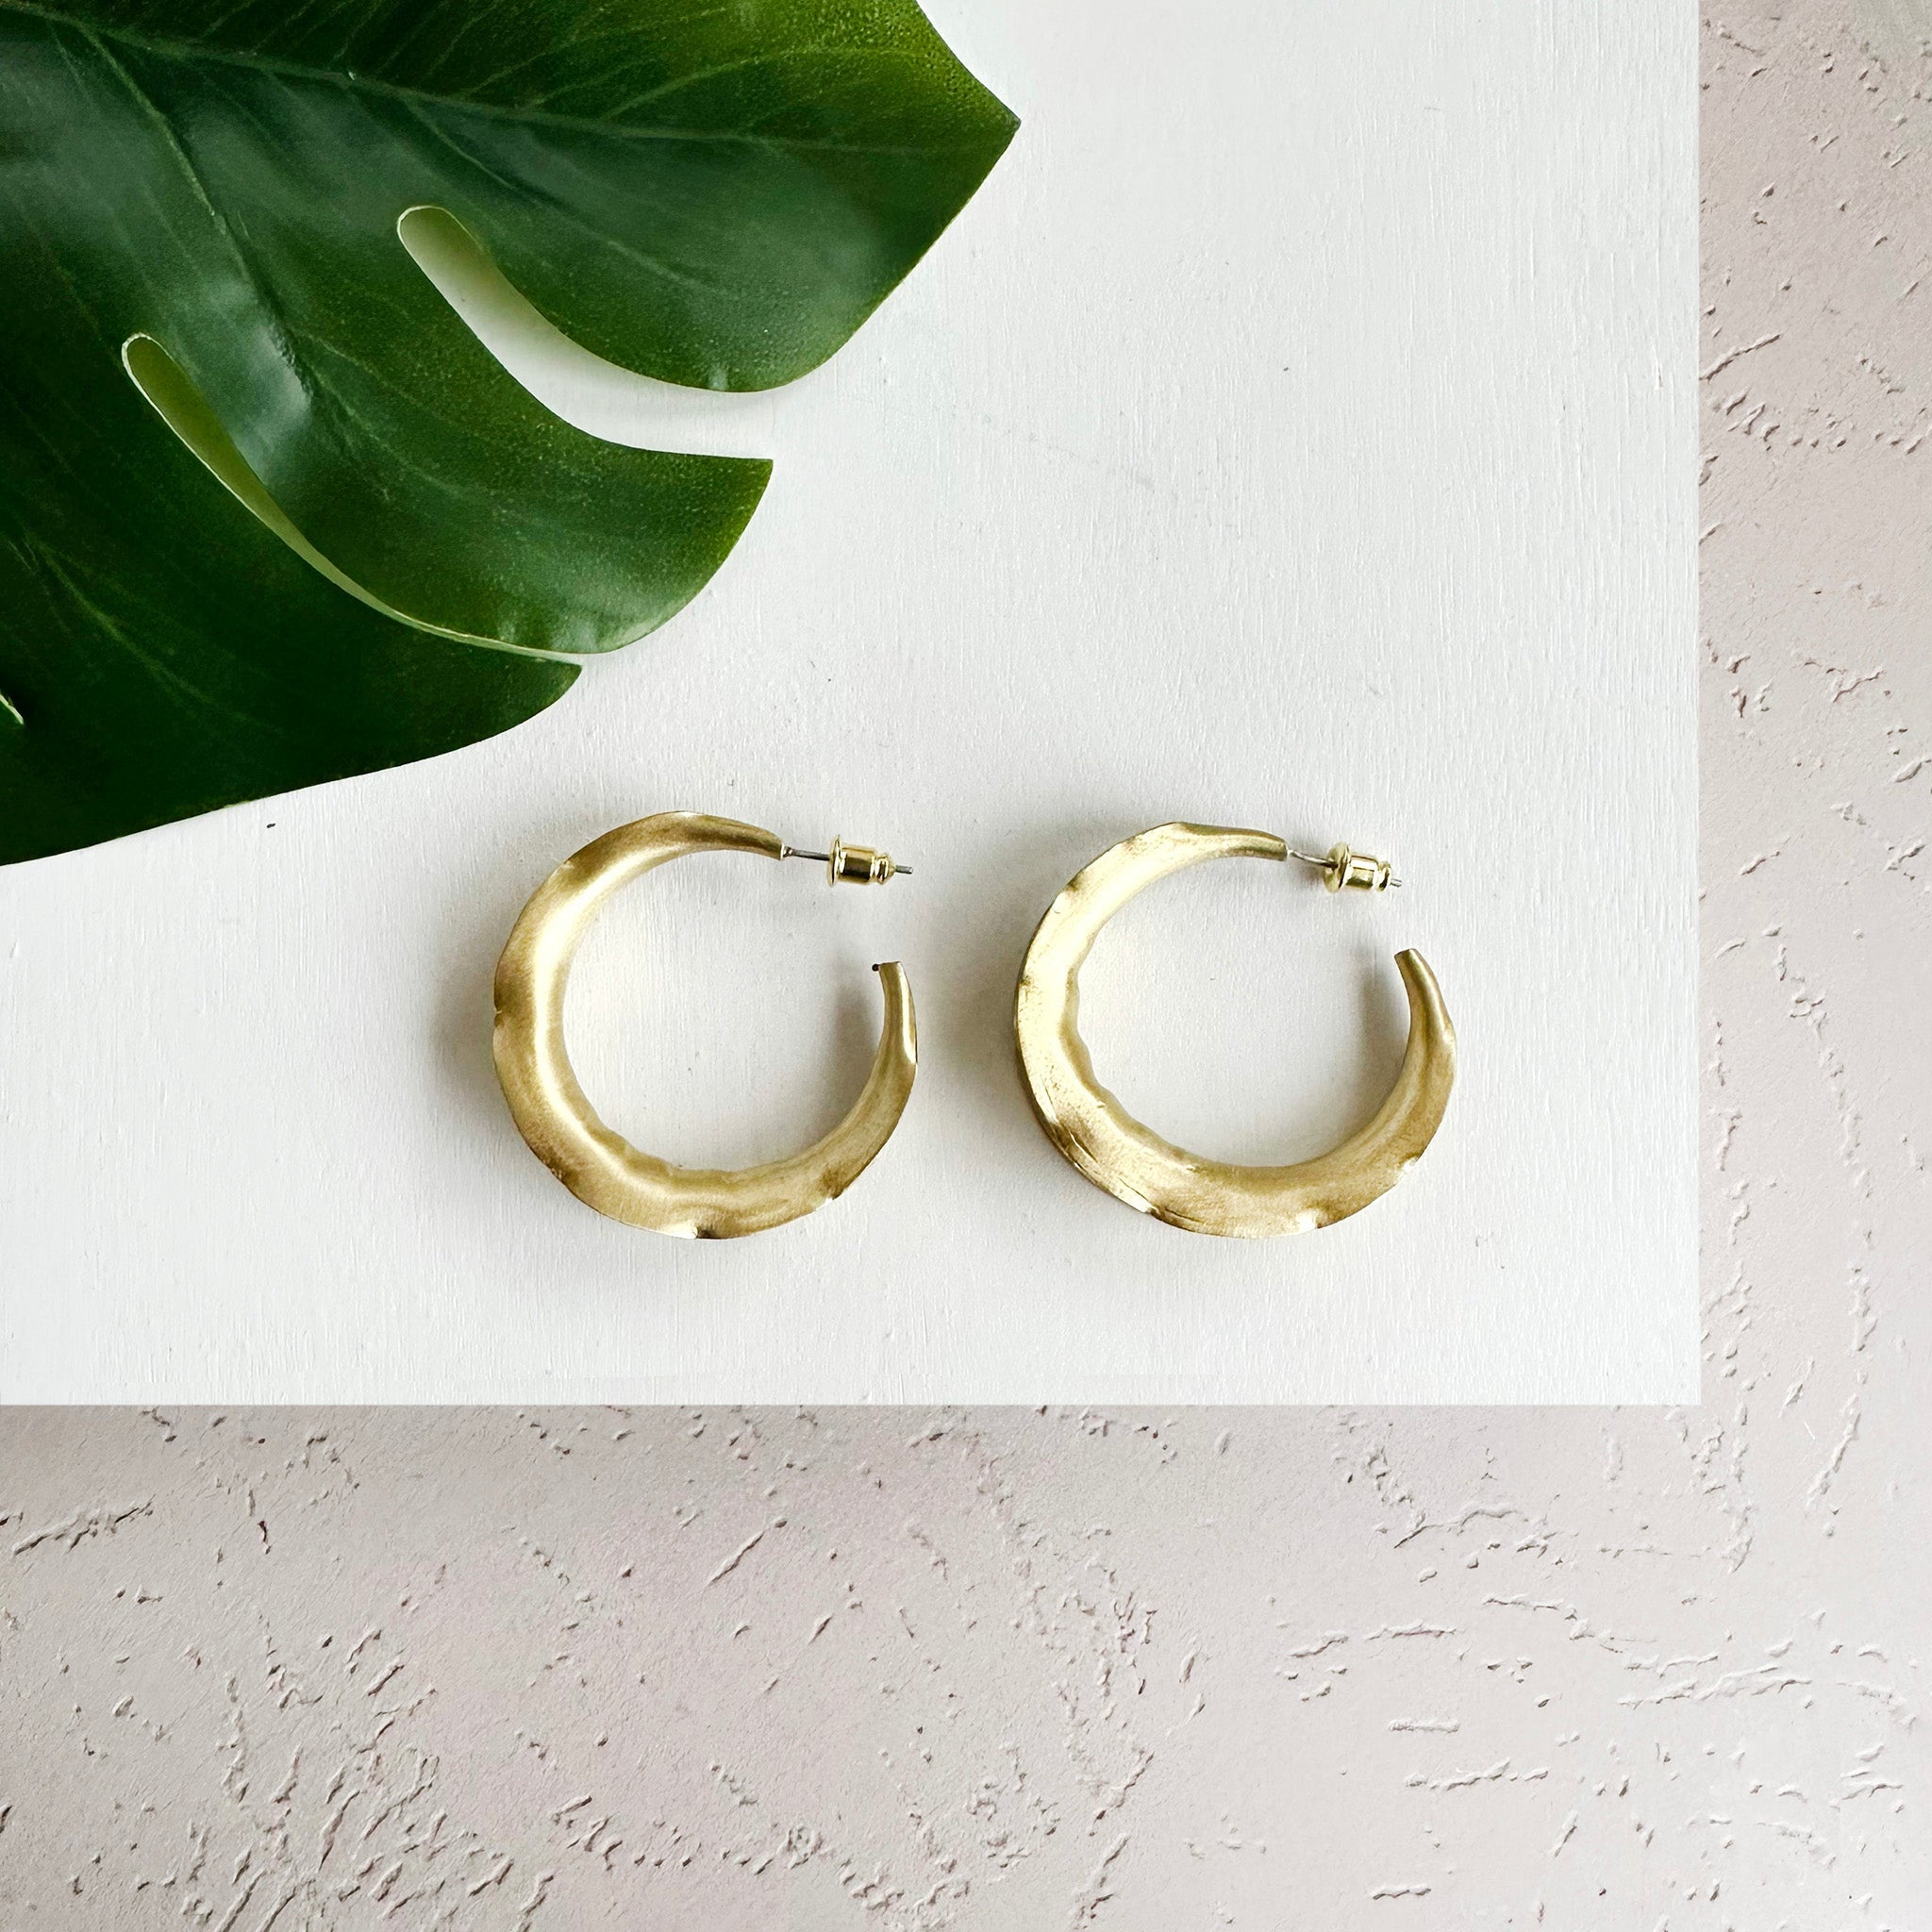 A pair of gold-toned hoops are shown, the edges rippled intentionally for dimension.